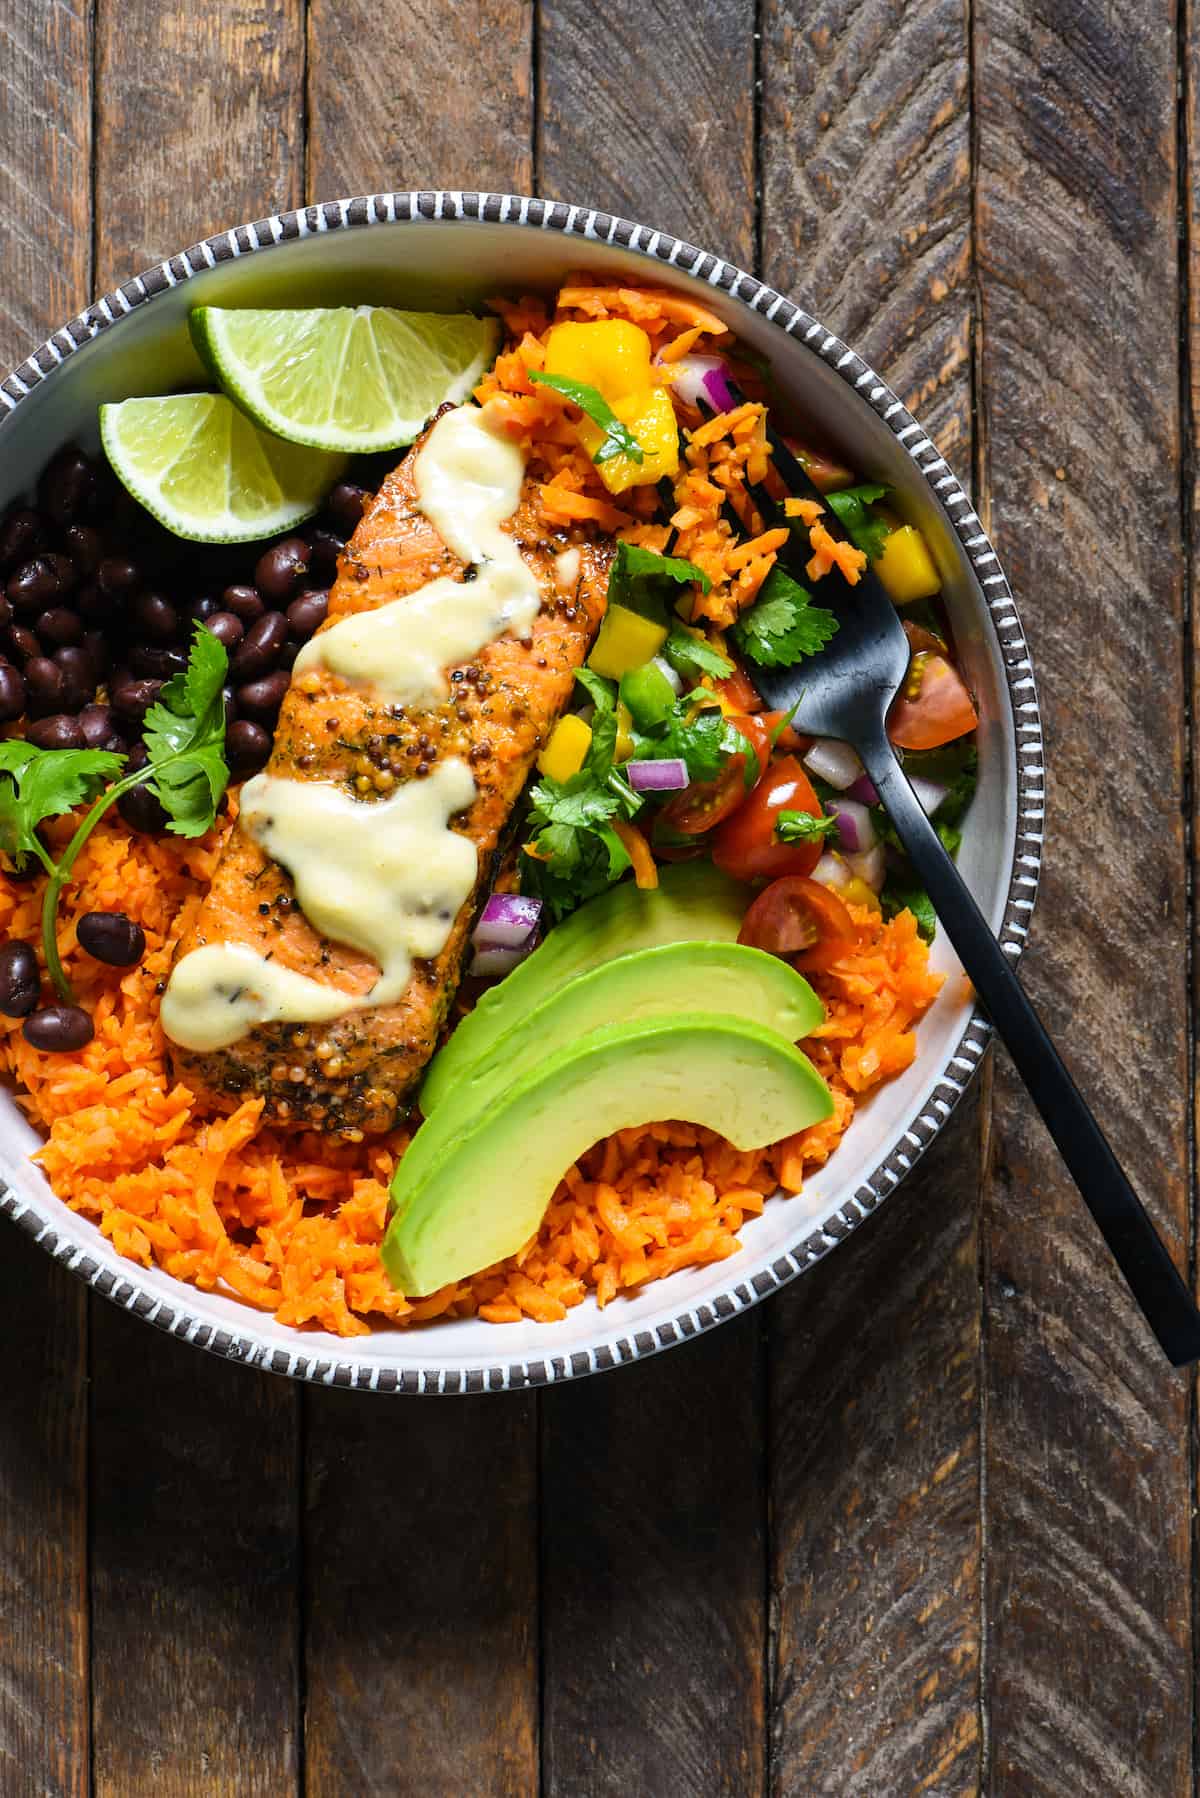 Fish Taco Bowls with Sweet Potato Rice - A colorful, healthful weeknight meal with fresh, bold flavors! | foxeslovelemons.com